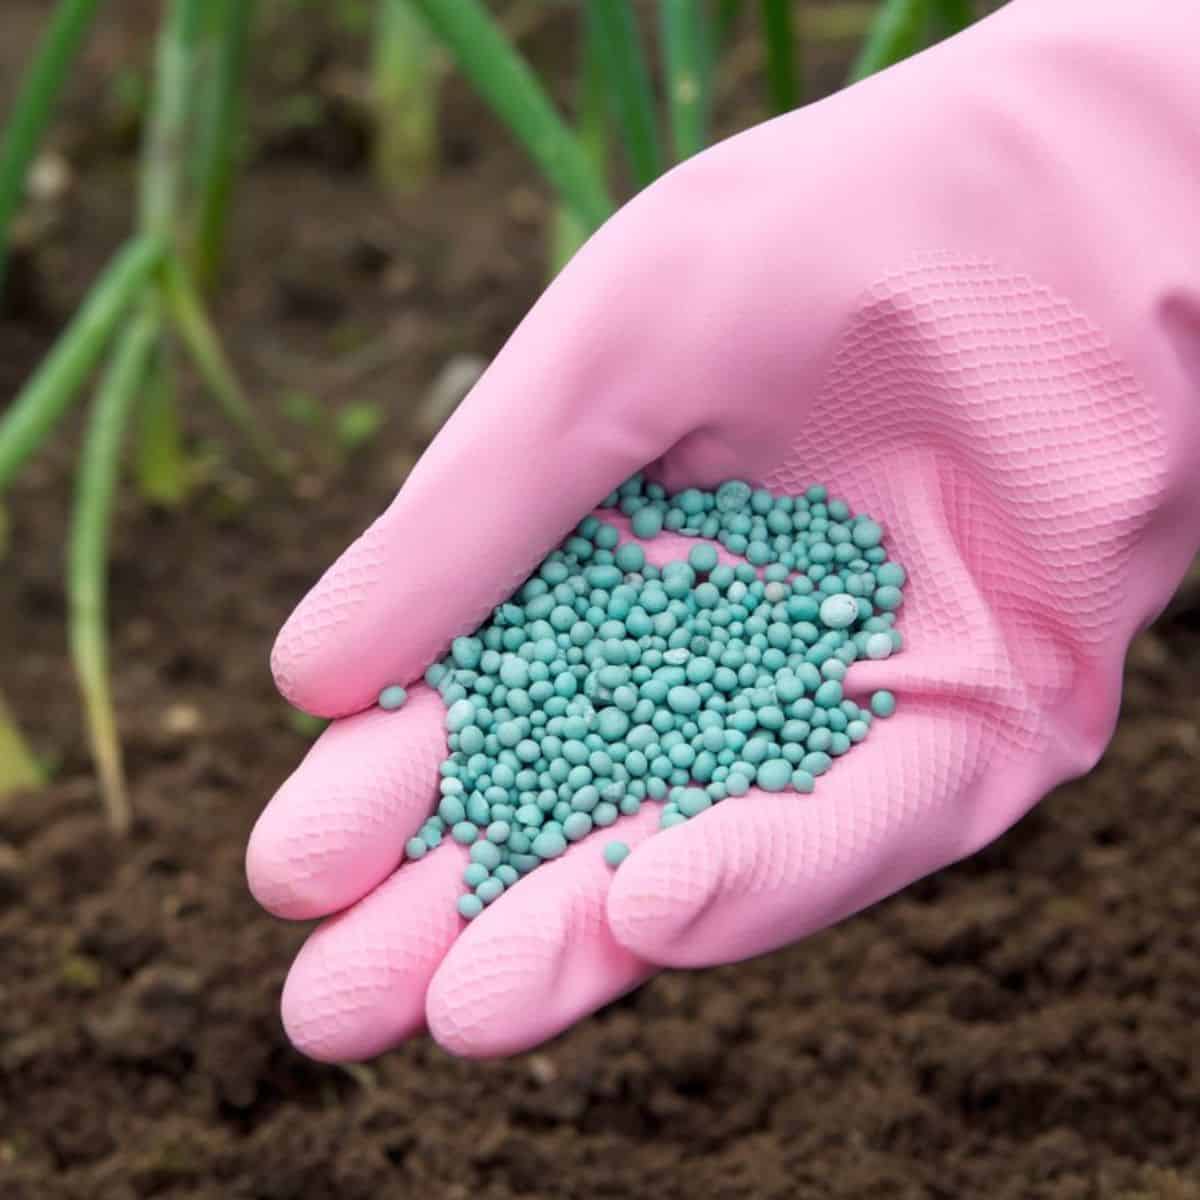 Hand with a pink glove holding a dry fertilizer over fresh soil.